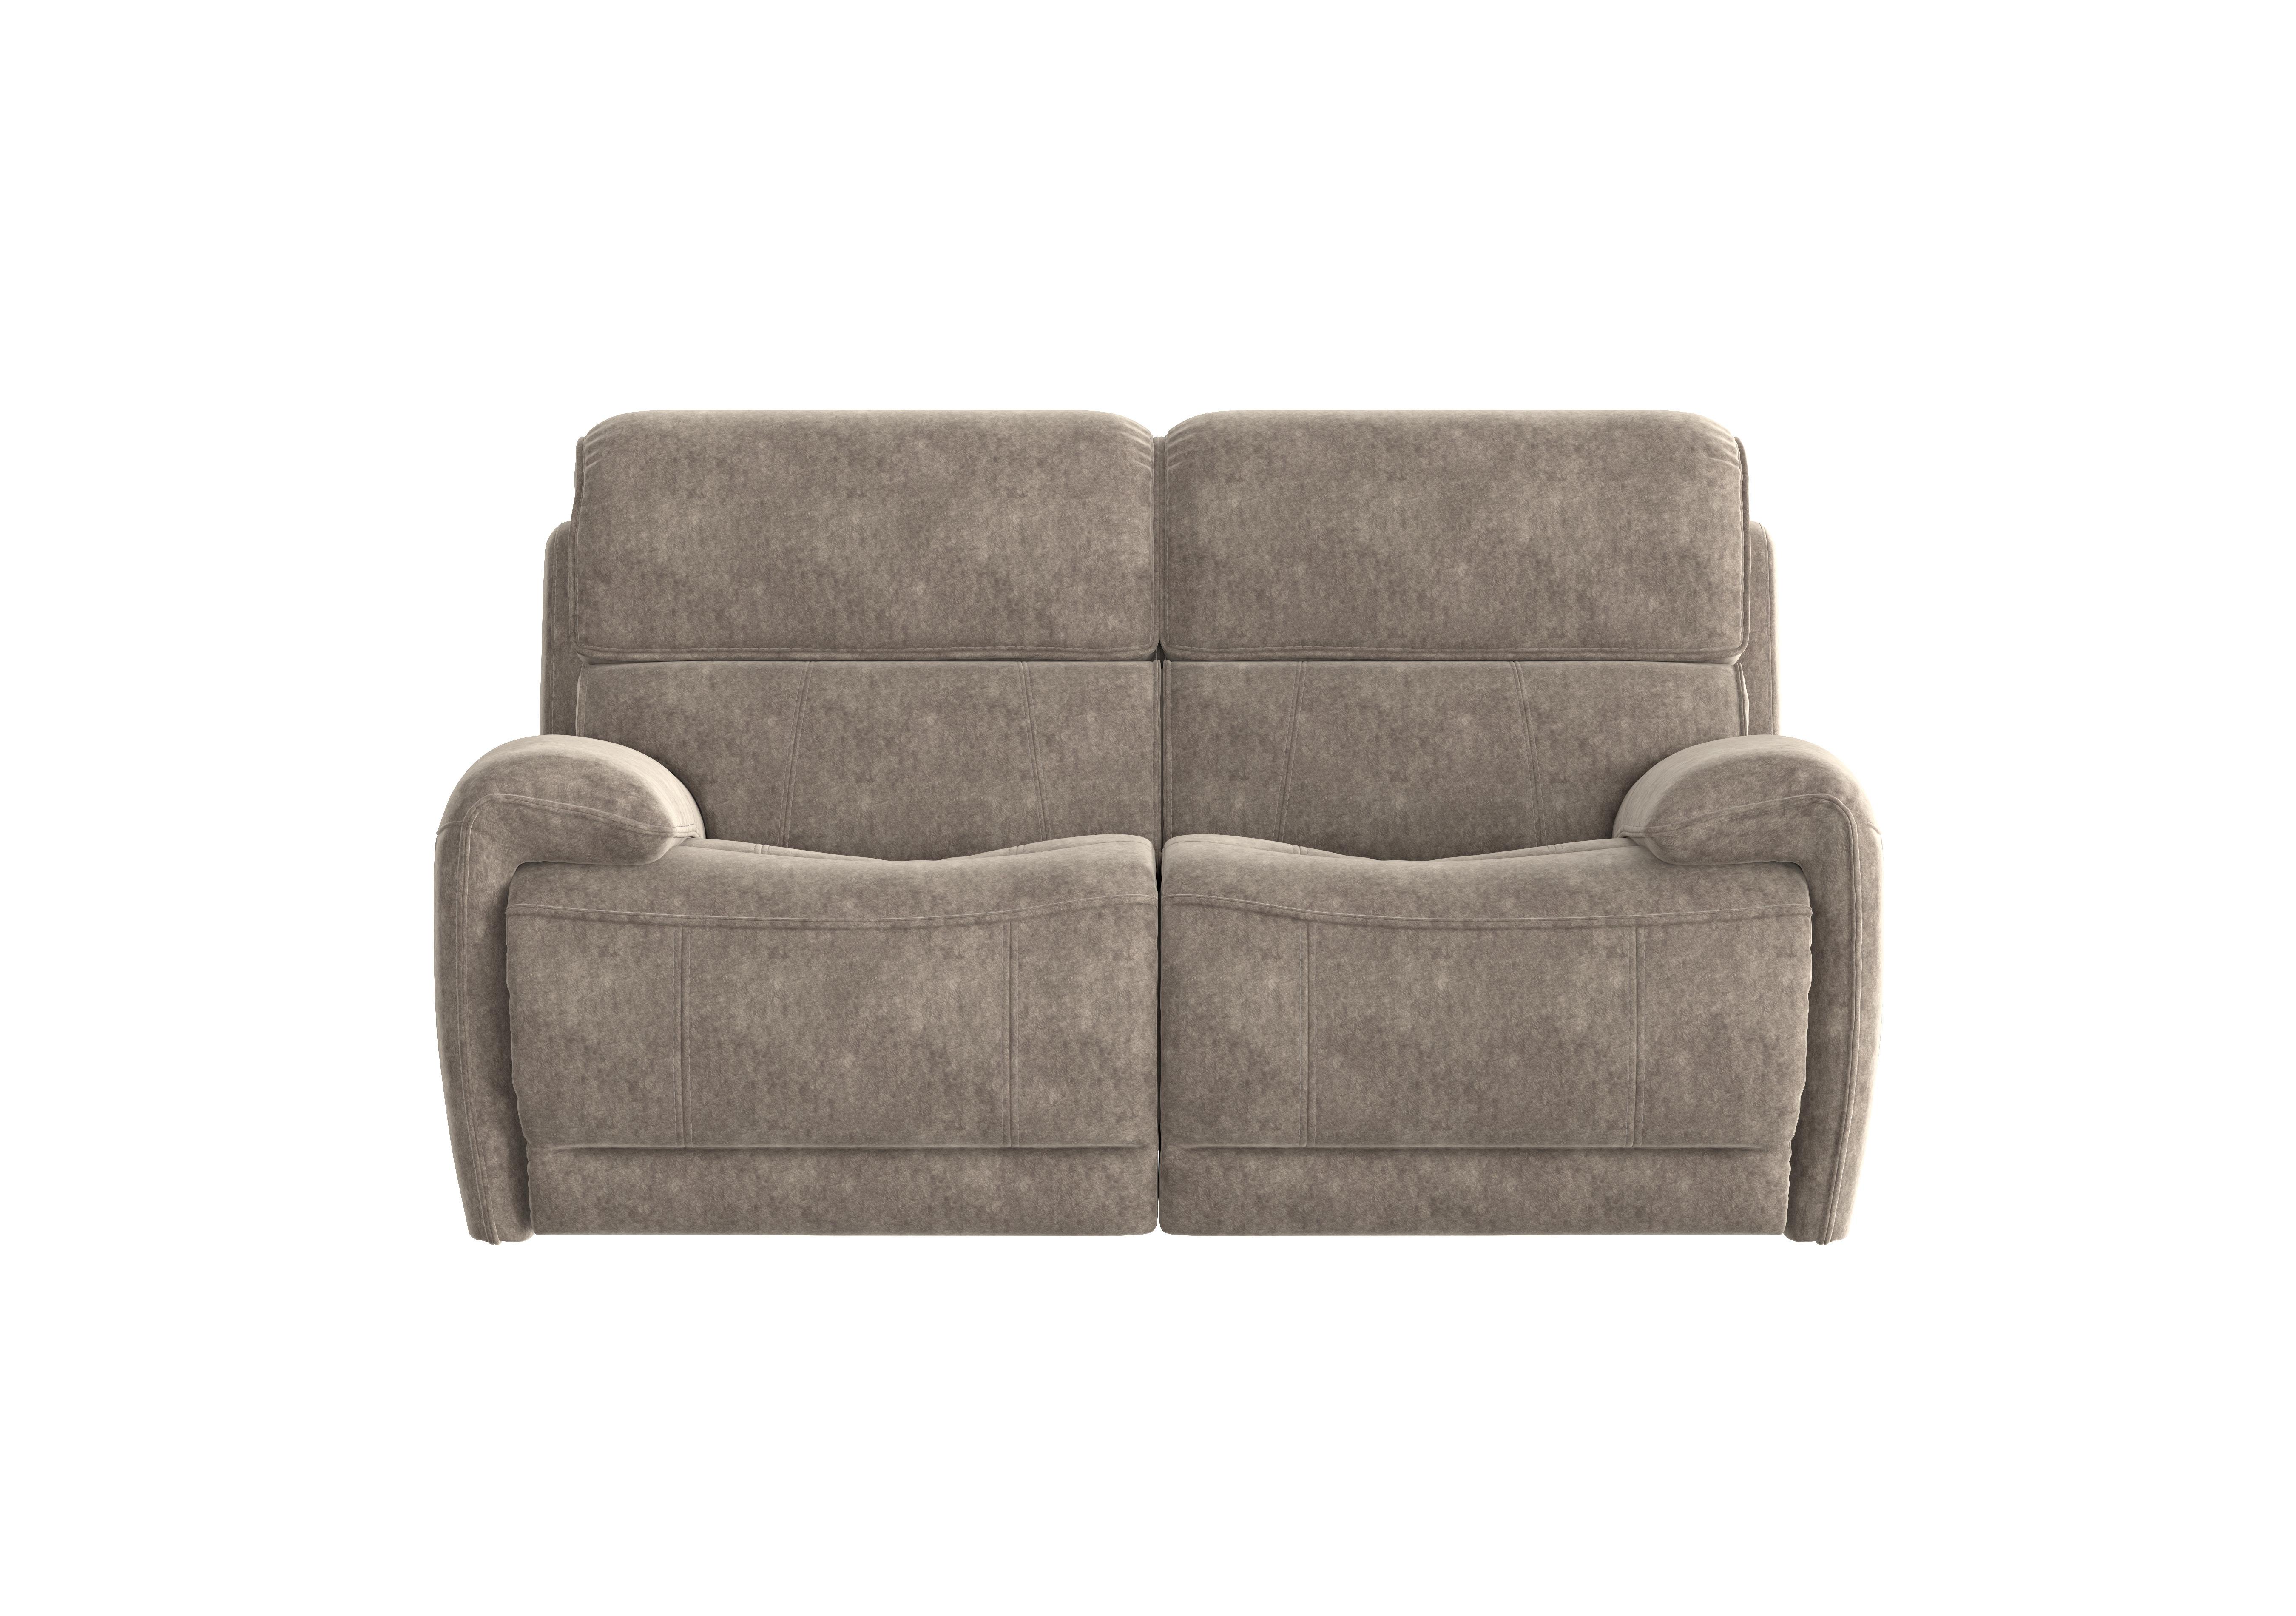 Link 2 Seater Fabric Power Recliner Sofa with Power Headrests in Bfa-Bnn-R29 Fv1 Mink on Furniture Village